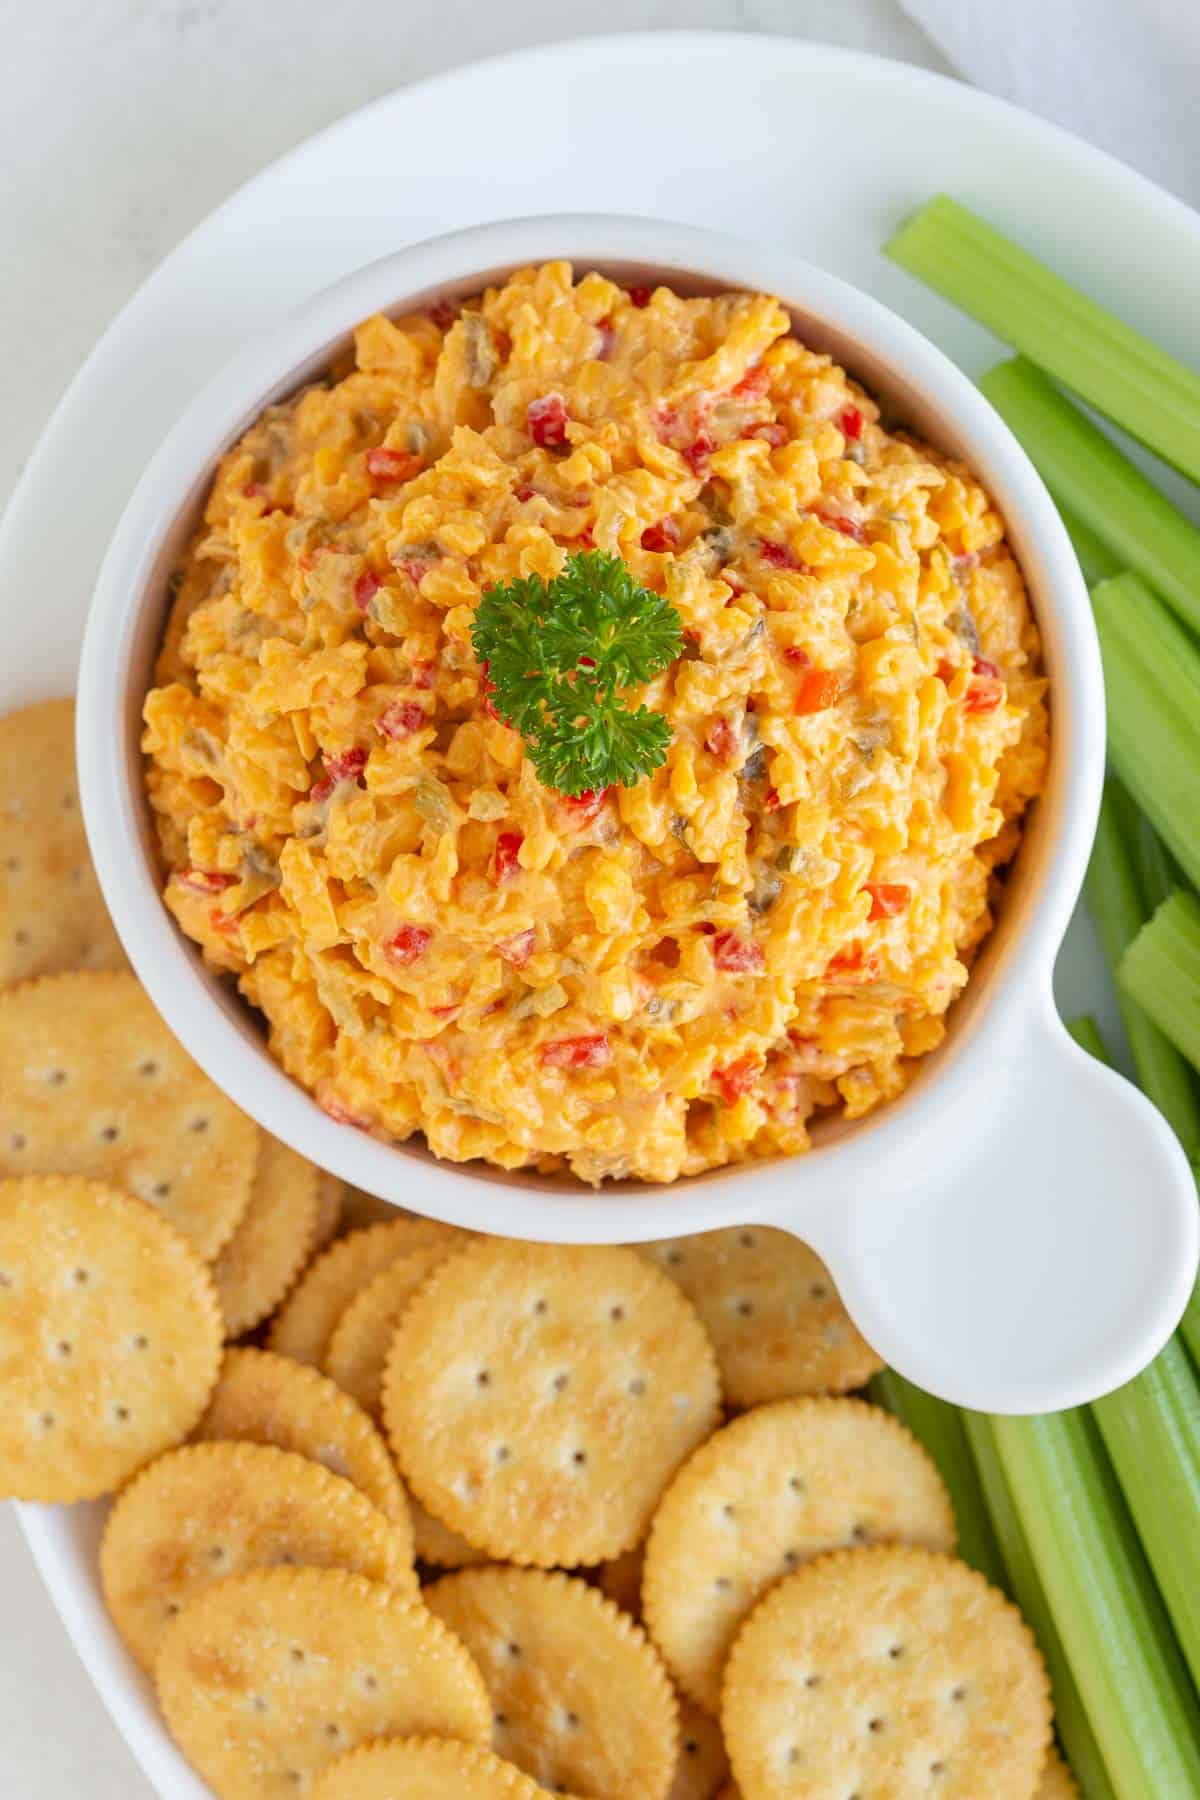 Overhead close up view of a bowl of pimento cheese spread.